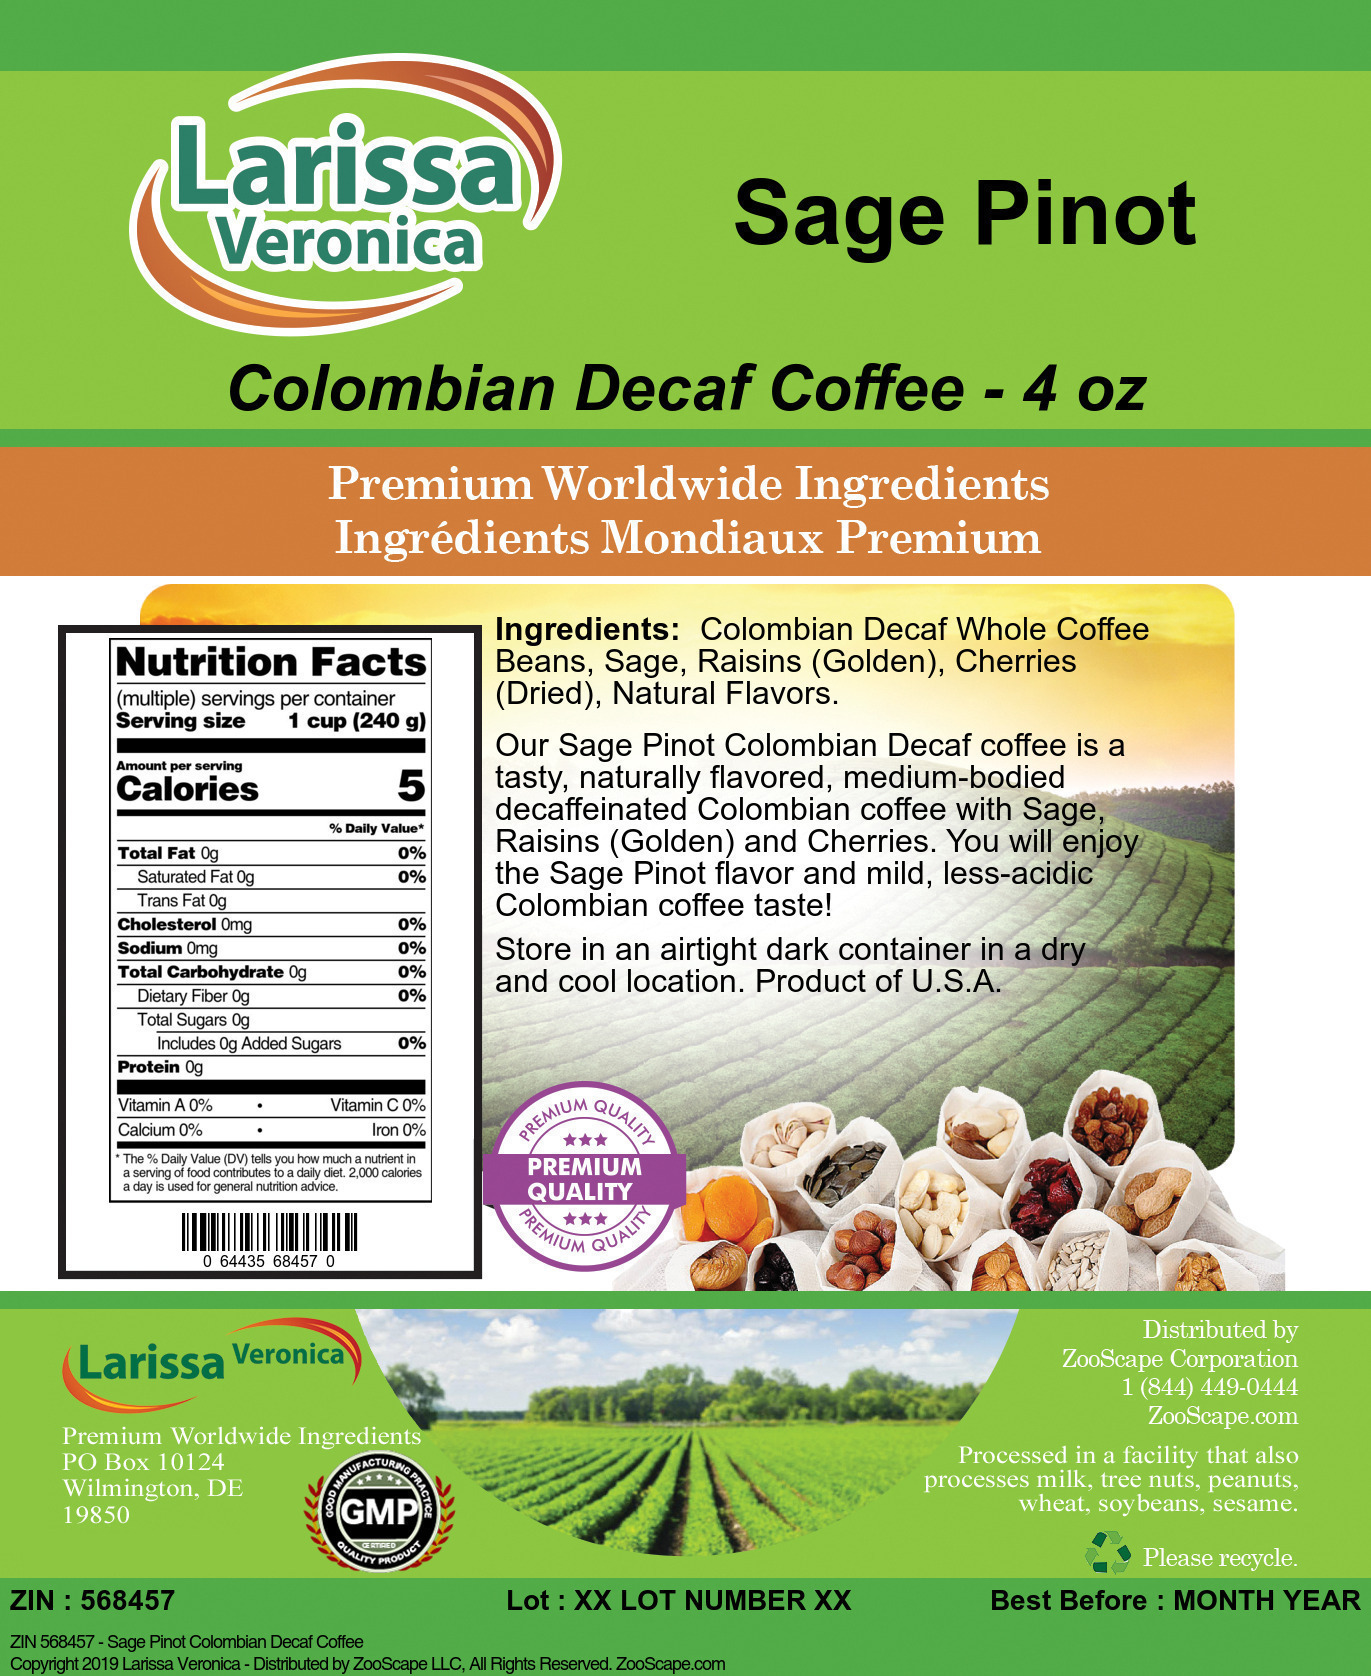 Sage Pinot Colombian Decaf Coffee - Label